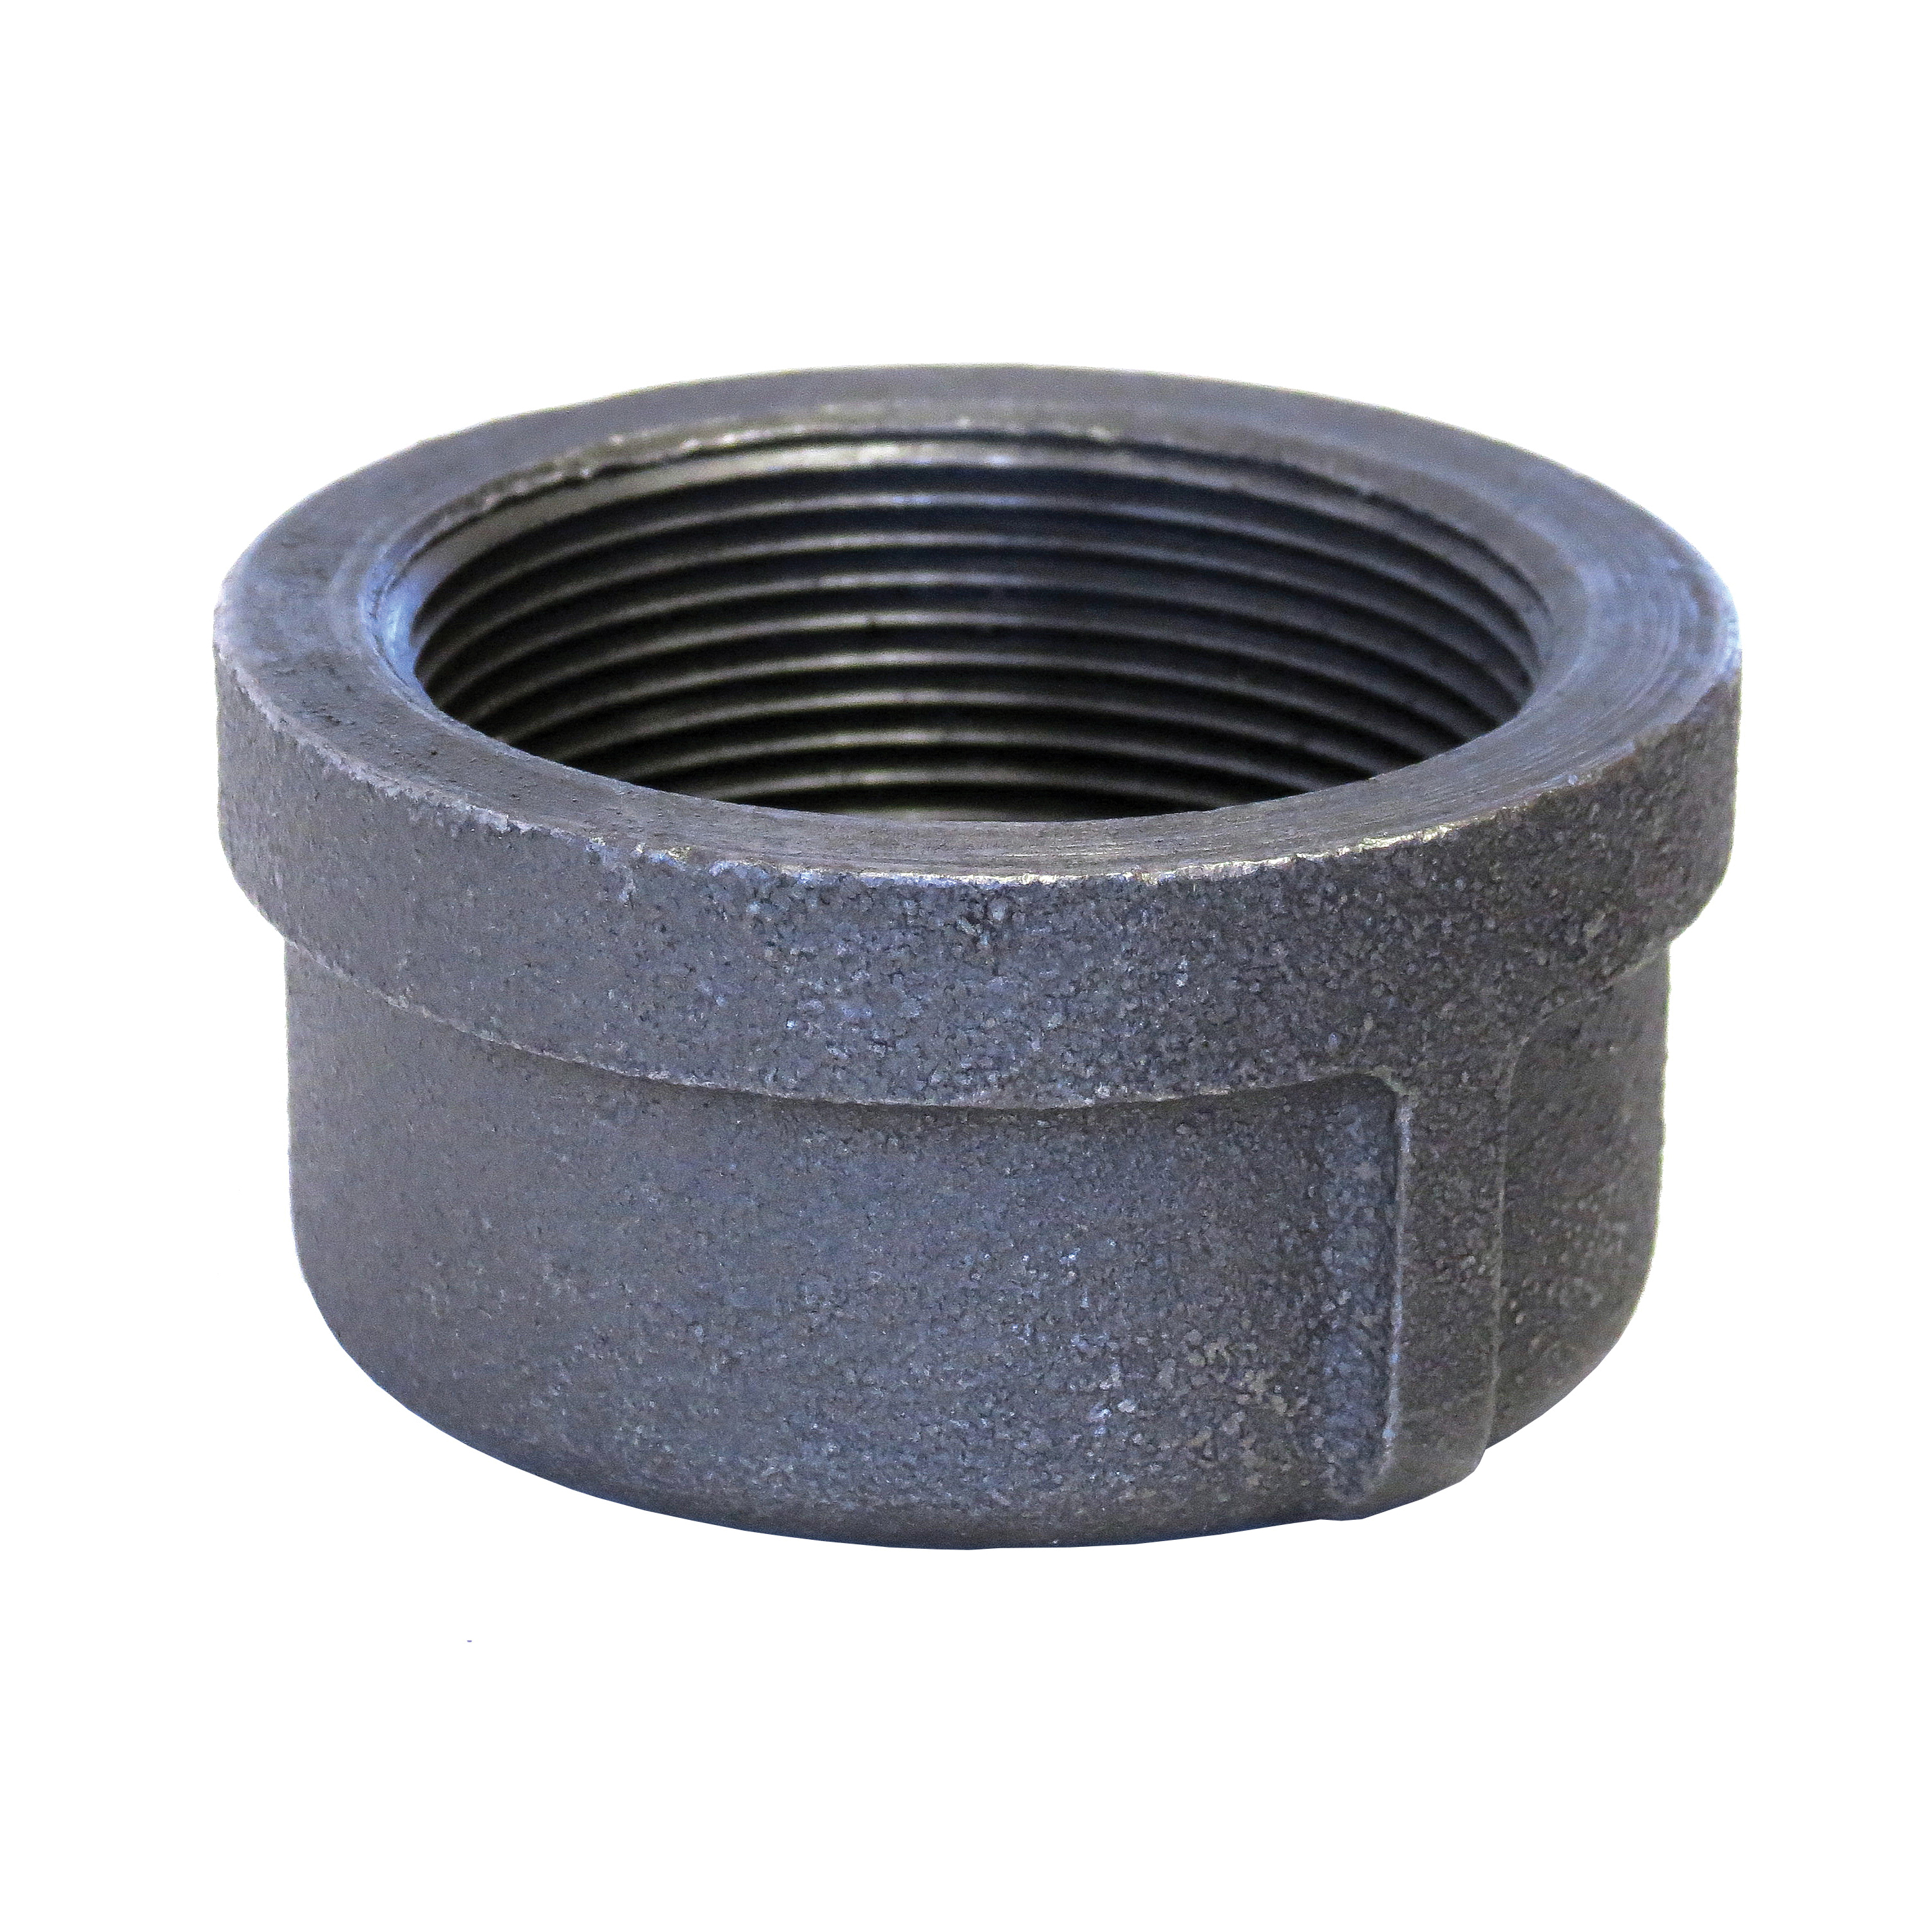 Anvil® 0318900842 FIG 1124 Standard Pipe Cap, 3 in Nominal, FNPT End Style, 150 lb, Malleable Iron, Black Oxide, Domestic